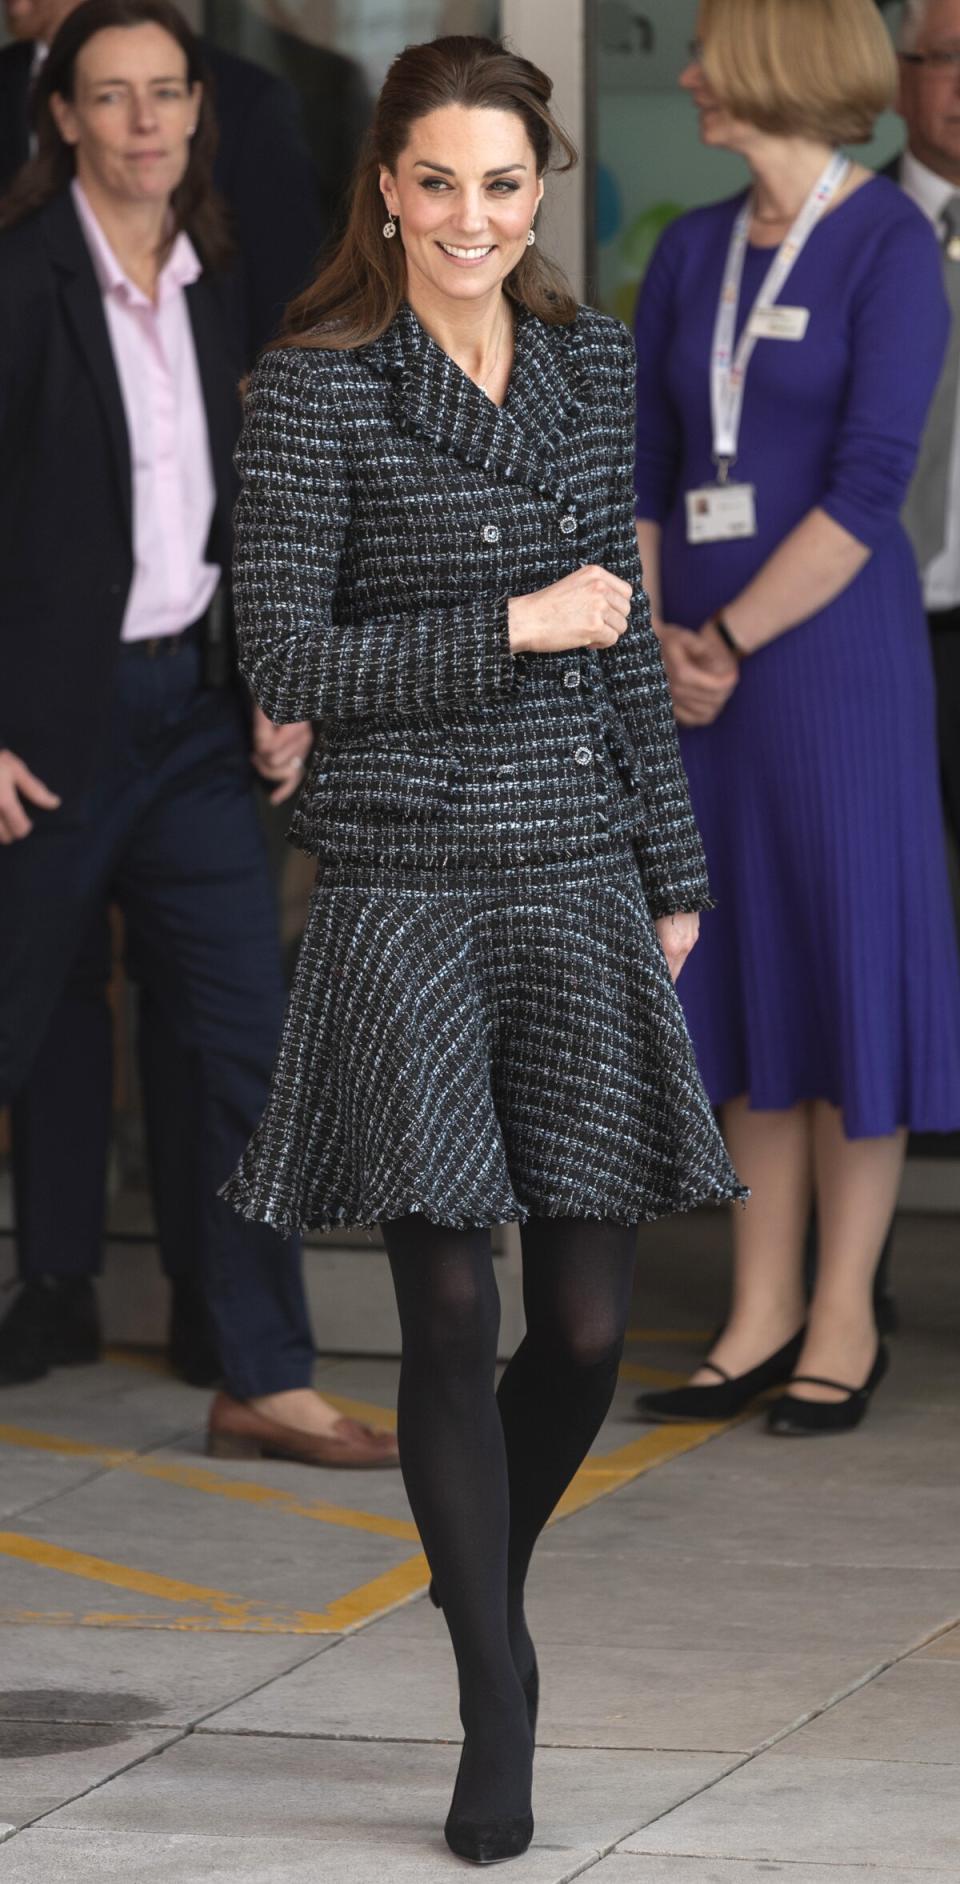 The Duchess of Cambridge <a href="https://people.com/royals/kate-middleton-visits-childrens-hospital-to-teach-kids-one-of-her-favorite-hobbies-photography/" rel="nofollow noopener" target="_blank" data-ylk="slk:joined a creative workshop run by the National Portrait Gallery’s Hospital Programme;elm:context_link;itc:0;sec:content-canvas" class="link ">joined a creative workshop run by the National Portrait Gallery’s Hospital Programme</a> at the Evelina London Children’s Hospital to help teach children about photography. For her visit, Kate wore a black and grey tweed <a href="https://click.linksynergy.com/deeplink?id=93xLBvPhAeE&mid=1237&murl=https%3A%2F%2Fshop.nordstrom.com%2Fbrands%2Fdolcegabbana--4944&u1=PEO%2CShopping%3AEverythingYouNeedtoCopyKateMiddleton%E2%80%99sChicWinterStyle%2Ckamiphillips2%2CUnc%2CGal%2C7360903%2C202002%2CI" rel="nofollow noopener" target="_blank" data-ylk="slk:Dolce & Gabbana;elm:context_link;itc:0;sec:content-canvas" class="link ">Dolce & Gabbana</a> skirt suit and black pumps. <strong>Get the Look!</strong> MakeMeChic Two Piece Slim Fit Suit Frayed Tweed Blazer and Skirt Set, $28.99–$35.99; <a href="https://www.amazon.com/MAKEMECHIC-Womens-Frayed-Blazer-2-Multi/dp/B07THXK9YN/ref=as_li_ss_tl?ie=UTF8&linkCode=ll1&tag=poamzfkatemiddletonwinterstylekphillips120-20&linkId=9c0e88a158faa2e89fa965fad3f456ce&language=en_US" rel="nofollow noopener" target="_blank" data-ylk="slk:amazon.com;elm:context_link;itc:0;sec:content-canvas" class="link ">amazon.com</a> Calvin Klein Collarless Tweed Jacket, $79.99 (orig. $139); <a href="https://click.linksynergy.com/deeplink?id=93xLBvPhAeE&mid=3184&murl=https%3A%2F%2Fwww.macys.com%2Fshop%2Fproduct%2Fcalvin-klein-collarless-tweed-jacket%3FID%3D10172326&u1=PEO%2CShopping%3AEverythingYouNeedtoCopyKateMiddleton%E2%80%99sChicWinterStyle%2Ckamiphillips2%2CUnc%2CGal%2C7360903%2C202002%2CI" rel="nofollow noopener" target="_blank" data-ylk="slk:macys.com;elm:context_link;itc:0;sec:content-canvas" class="link ">macys.com</a>; Calvin Klein Sequined Tweed Skirt, $53.40 (orig. $89); <a href="https://click.linksynergy.com/deeplink?id=93xLBvPhAeE&mid=3184&murl=https%3A%2F%2Fwww.macys.com%2Fshop%2Fproduct%2Fcalvin-klein-sequined-tweed-skirt%3FID%3D10172343&u1=PEO%2CShopping%3AEverythingYouNeedtoCopyKateMiddleton%E2%80%99sChicWinterStyle%2Ckamiphillips2%2CUnc%2CGal%2C7360903%2C202002%2CI" rel="nofollow noopener" target="_blank" data-ylk="slk:macys.com;elm:context_link;itc:0;sec:content-canvas" class="link ">macys.com</a> Julia Jordan Long Sleeve Mock Two-Piece Tweed Dress, $149; <a href="https://click.linksynergy.com/deeplink?id=93xLBvPhAeE&mid=1237&murl=https%3A%2F%2Fshop.nordstrom.com%2Fs%2Fjulia-jordan-long-sleeve-mock-two-piece-tweed-dress%2F5518247%2Ffull&u1=PEO%2CShopping%3AEverythingYouNeedtoCopyKateMiddleton%E2%80%99sChicWinterStyle%2Ckamiphillips2%2CUnc%2CGal%2C7360903%2C202002%2CI" rel="nofollow noopener" target="_blank" data-ylk="slk:nordstrom.com;elm:context_link;itc:0;sec:content-canvas" class="link ">nordstrom.com</a> Asos Design Mono Boucle Cropped Suit Blazer, $31 (orig. $87); <a href="https://click.linksynergy.com/deeplink?id=93xLBvPhAeE&mid=35719&murl=https%3A%2F%2Fwww.asos.com%2Fus%2Fasos-design%2Fasos-design-mono-boucle-suit%2Fgrp%2F25639&u1=PEO%2CShopping%3AEverythingYouNeedtoCopyKateMiddleton%E2%80%99sChicWinterStyle%2Ckamiphillips2%2CUnc%2CGal%2C7360903%2C202002%2CI" rel="nofollow noopener" target="_blank" data-ylk="slk:asos.com;elm:context_link;itc:0;sec:content-canvas" class="link ">asos.com</a>; Asos Design Mono Boucle Mini Suit Skirt, $26 (orig. $40); <a href="https://click.linksynergy.com/deeplink?id=93xLBvPhAeE&mid=35719&murl=https%3A%2F%2Fwww.asos.com%2Fus%2Fasos-design%2Fasos-design-mono-boucle-suit%2Fgrp%2F25639&u1=PEO%2CShopping%3AEverythingYouNeedtoCopyKateMiddleton%E2%80%99sChicWinterStyle%2Ckamiphillips2%2CUnc%2CGal%2C7360903%2C202002%2CI" rel="nofollow noopener" target="_blank" data-ylk="slk:asos.com;elm:context_link;itc:0;sec:content-canvas" class="link ">asos.com</a> Julia Jordan Tweed A-Line Jacket Dress, $79.99 (orig. $149); <a href="https://click.linksynergy.com/deeplink?id=93xLBvPhAeE&mid=3184&murl=https%3A%2F%2Fwww.macys.com%2Fshop%2Fproduct%2Fjulia-jordan-tweed-a-line-jacket-dress%3FID%3D10189285&u1=PEO%2CShopping%3AEverythingYouNeedtoCopyKateMiddleton%E2%80%99sChicWinterStyle%2Ckamiphillips2%2CUnc%2CGal%2C7360903%2C202002%2CI" rel="nofollow noopener" target="_blank" data-ylk="slk:macys.com;elm:context_link;itc:0;sec:content-canvas" class="link ">macys.com</a> Fashion Union Blazer in Mixed Check Two-Piece, $83; <a href="https://click.linksynergy.com/deeplink?id=93xLBvPhAeE&mid=35719&murl=https%3A%2F%2Fwww.asos.com%2Fus%2Ffashion-union%2Ffashion-union-blazer-in-mixed-check-two-piece%2Fprd%2F13647891&u1=PEO%2CShopping%3AEverythingYouNeedtoCopyKateMiddleton%E2%80%99sChicWinterStyle%2Ckamiphillips2%2CUnc%2CGal%2C7360903%2C202002%2CI" rel="nofollow noopener" target="_blank" data-ylk="slk:asos.com;elm:context_link;itc:0;sec:content-canvas" class="link ">asos.com</a>; Fashion Union Skirt in Mixed Check Two-Piece, $51; <a href="https://click.linksynergy.com/deeplink?id=93xLBvPhAeE&mid=35719&murl=https%3A%2F%2Fwww.asos.com%2Fus%2Ffashion-union%2Ffashion-union-skirt-in-mixed-check-two-piece%2Fprd%2F13647910&u1=PEO%2CShopping%3AEverythingYouNeedtoCopyKateMiddleton%E2%80%99sChicWinterStyle%2Ckamiphillips2%2CUnc%2CGal%2C7360903%2C202002%2CI" rel="nofollow noopener" target="_blank" data-ylk="slk:asos.com;elm:context_link;itc:0;sec:content-canvas" class="link ">asos.com</a>